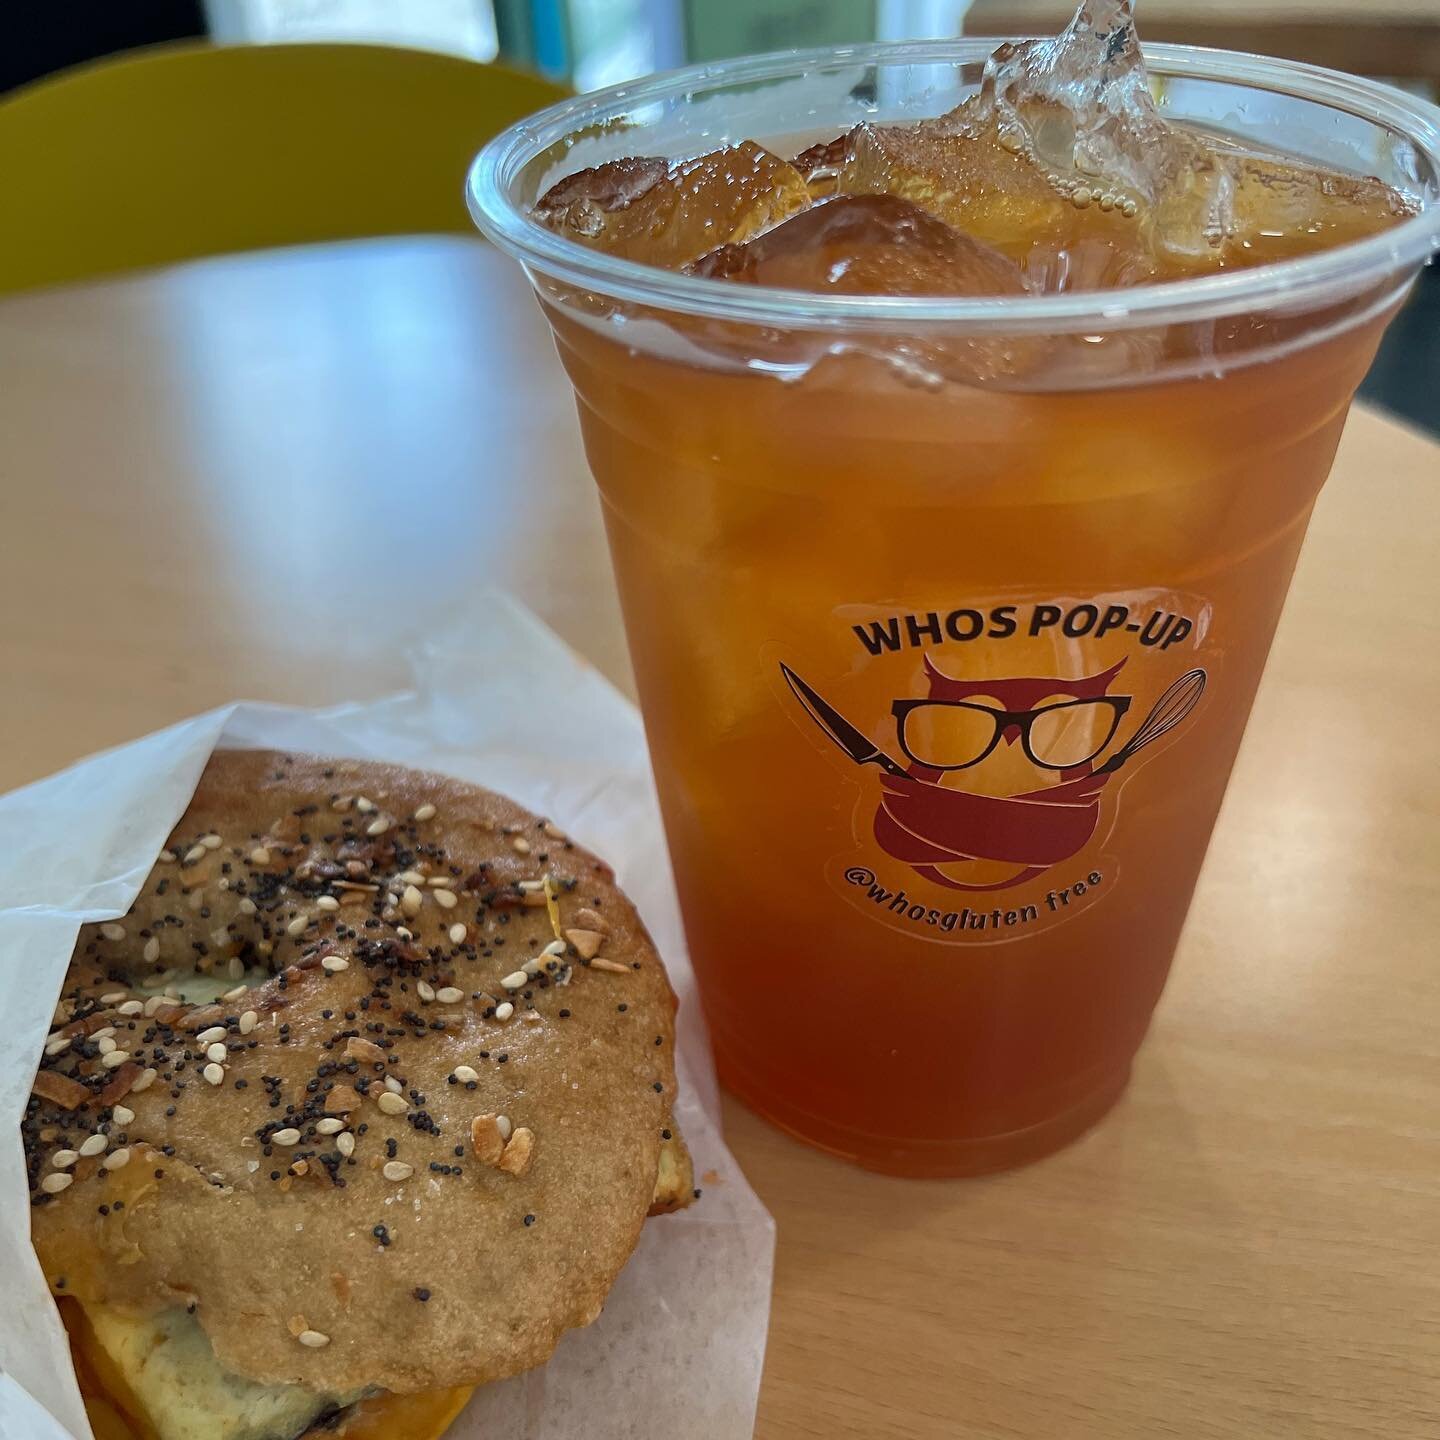 Iced tea with lavender honey syrup and a vegan egg and cheese 🥯 at our pop up location in Hoboken at @vegbarhoboken.